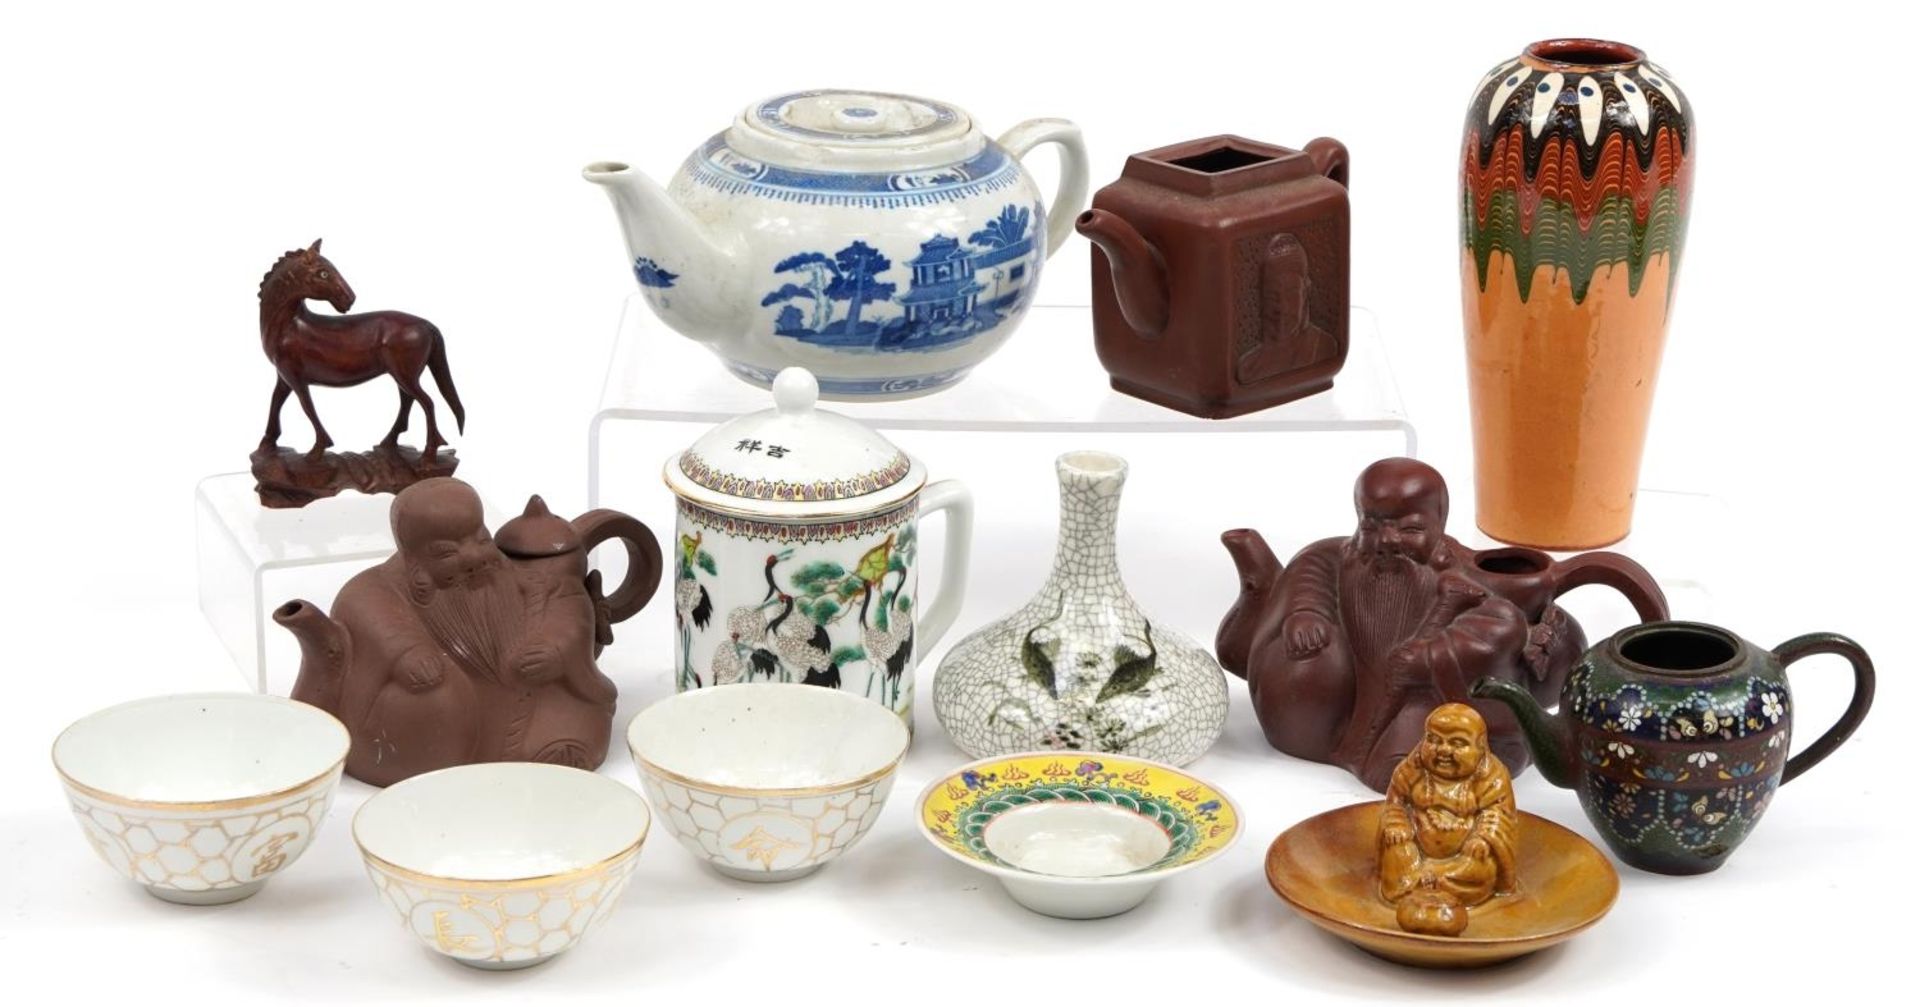 Chinese and Japanese ceramics and sundry items including Yixing terracotta teapots and a cloisonne